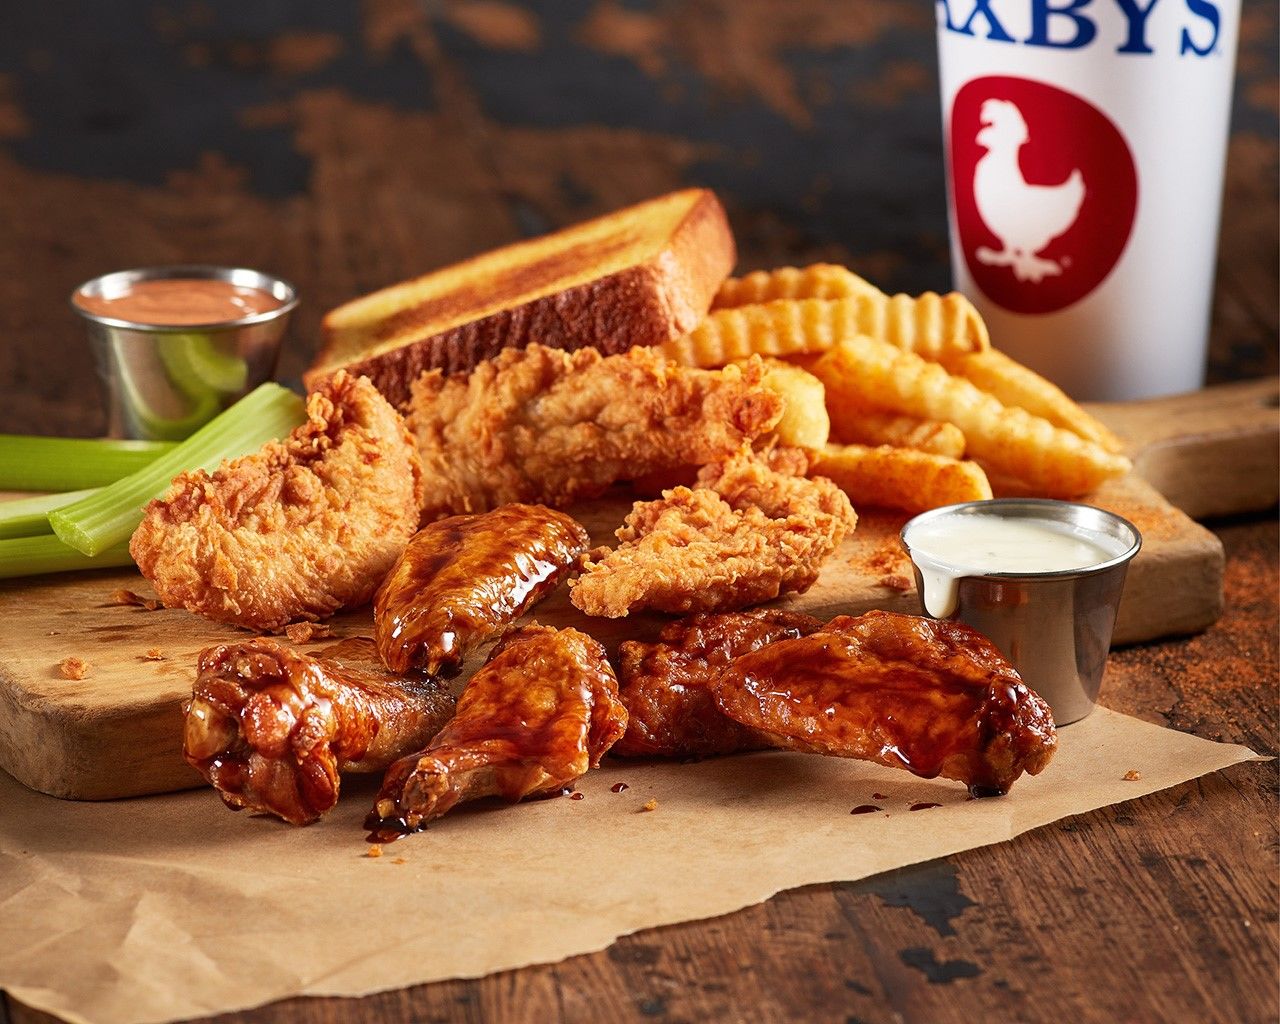 Promotional image of Zaxby's Chicken.